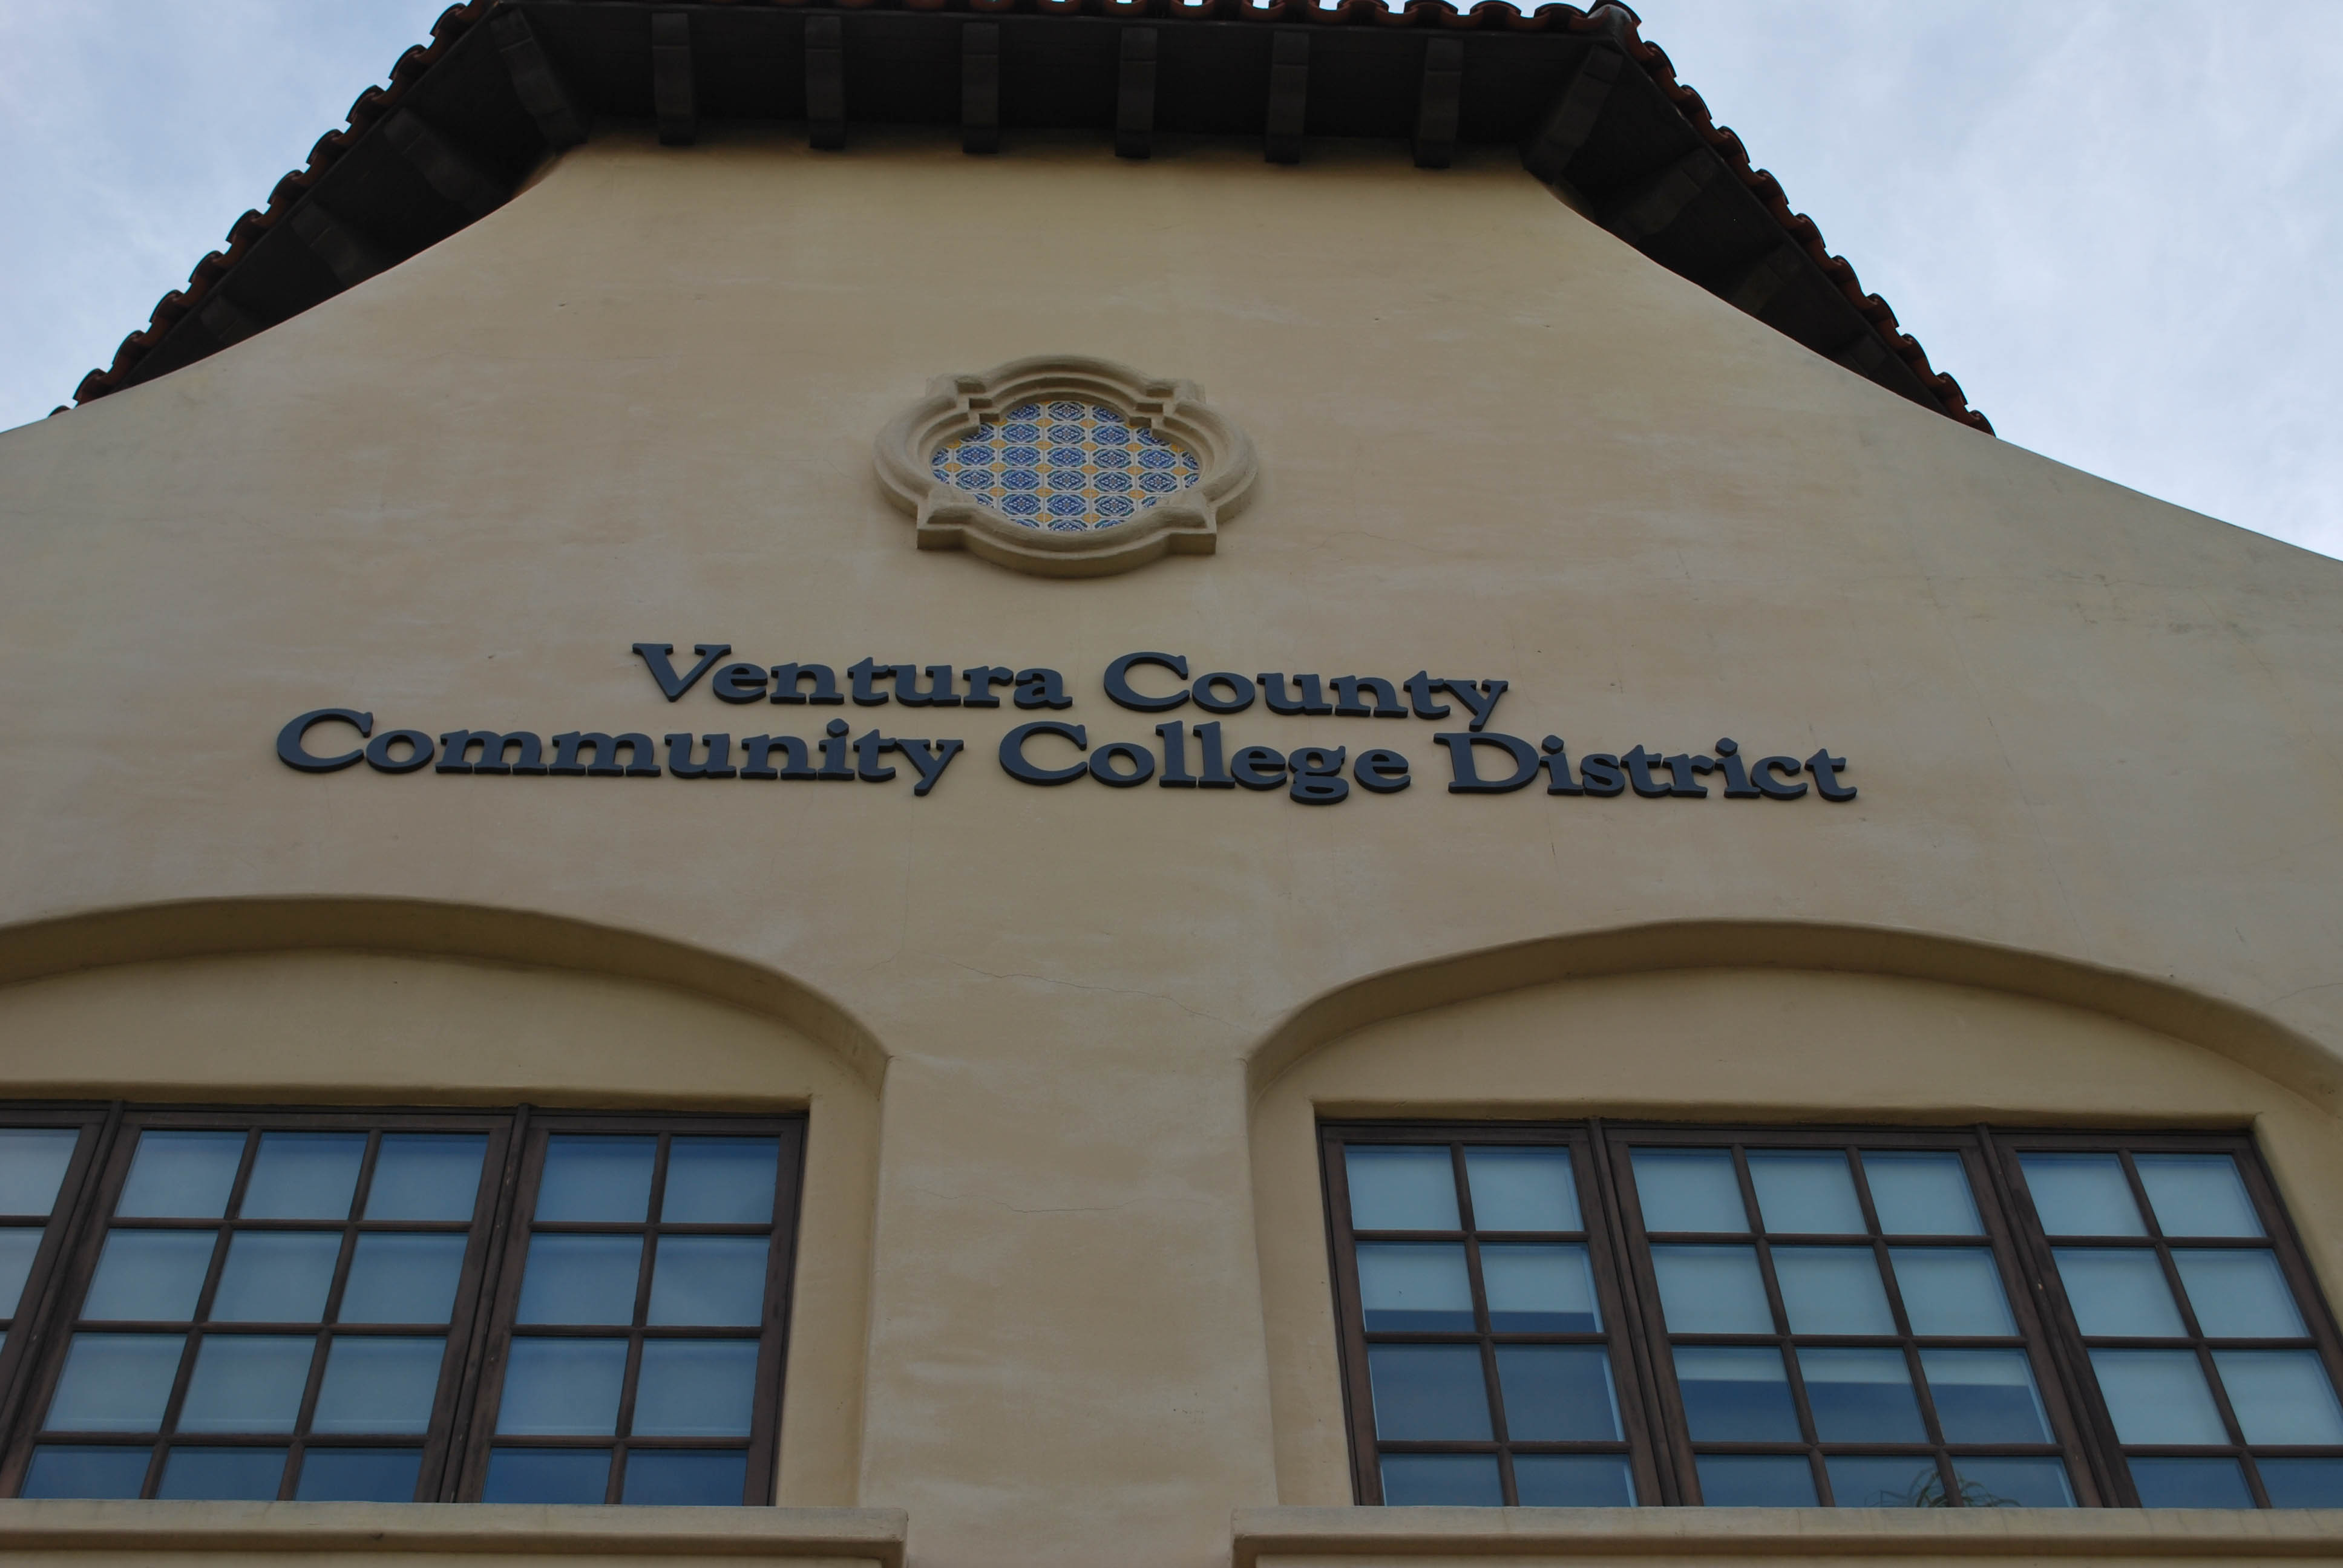 Side of DAC building with windows and sign "Ventura County Community College District"